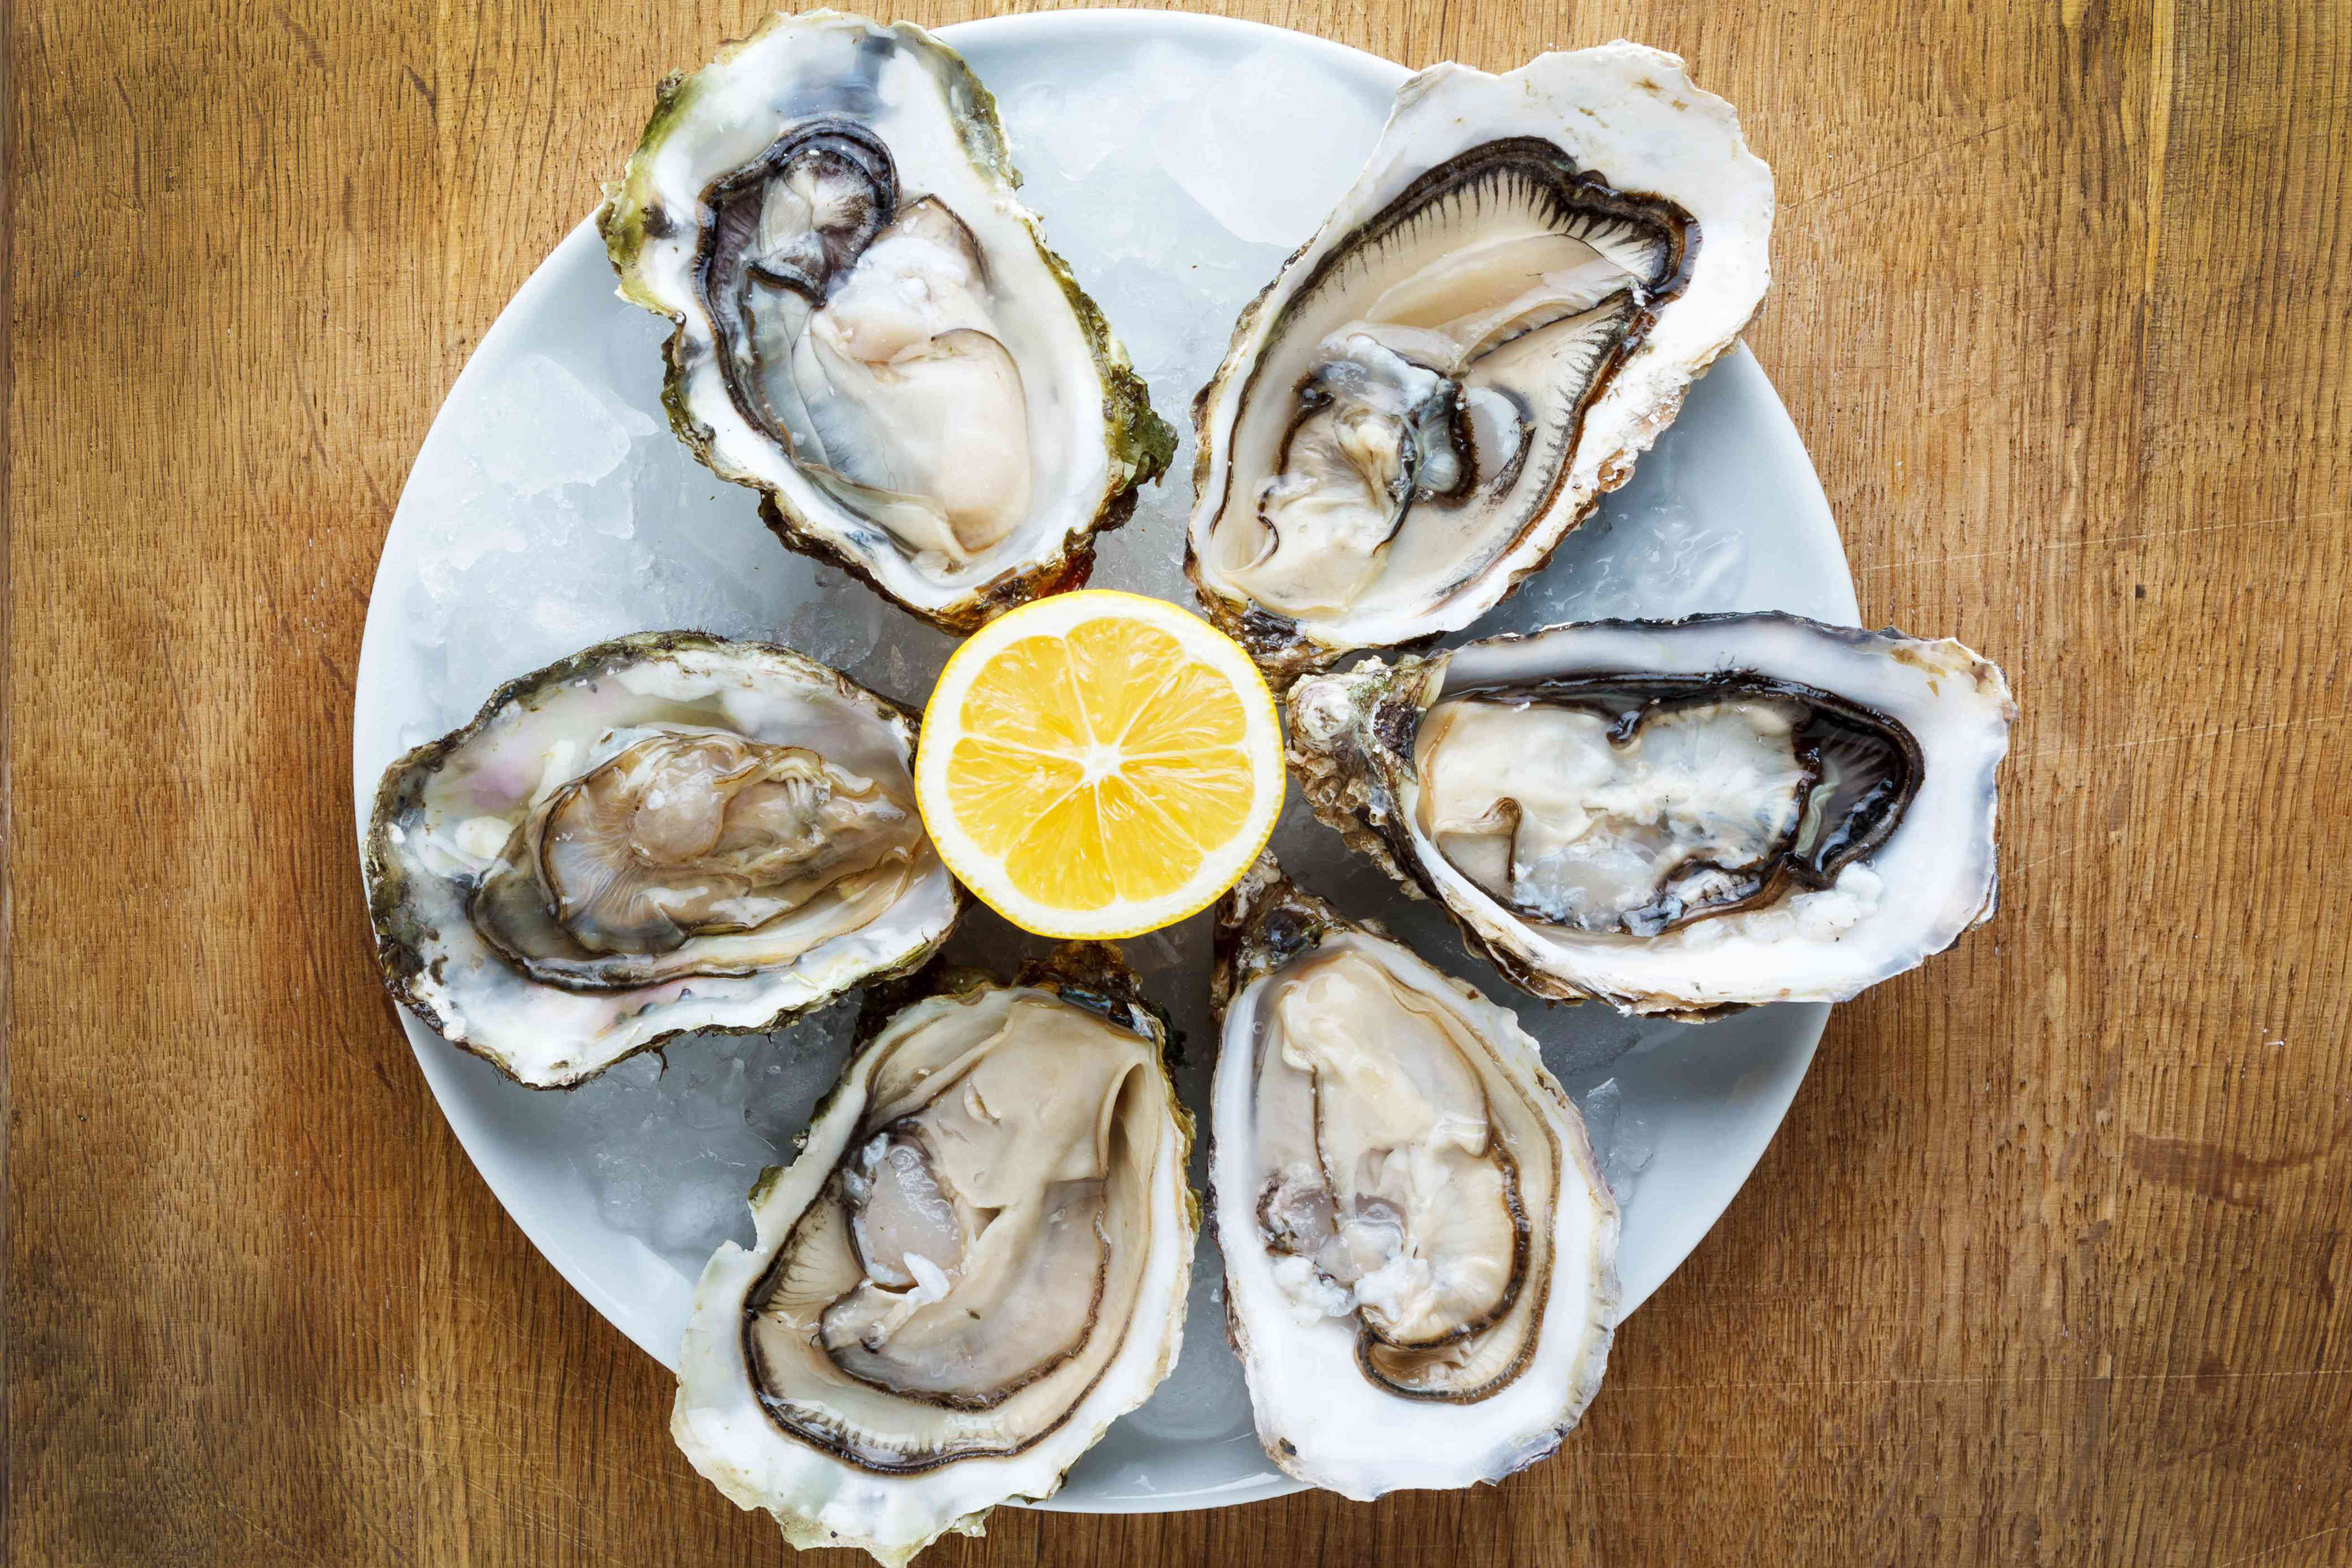 Texas Man Dies from FleshEating Bacteria After Consuming Raw Oysters